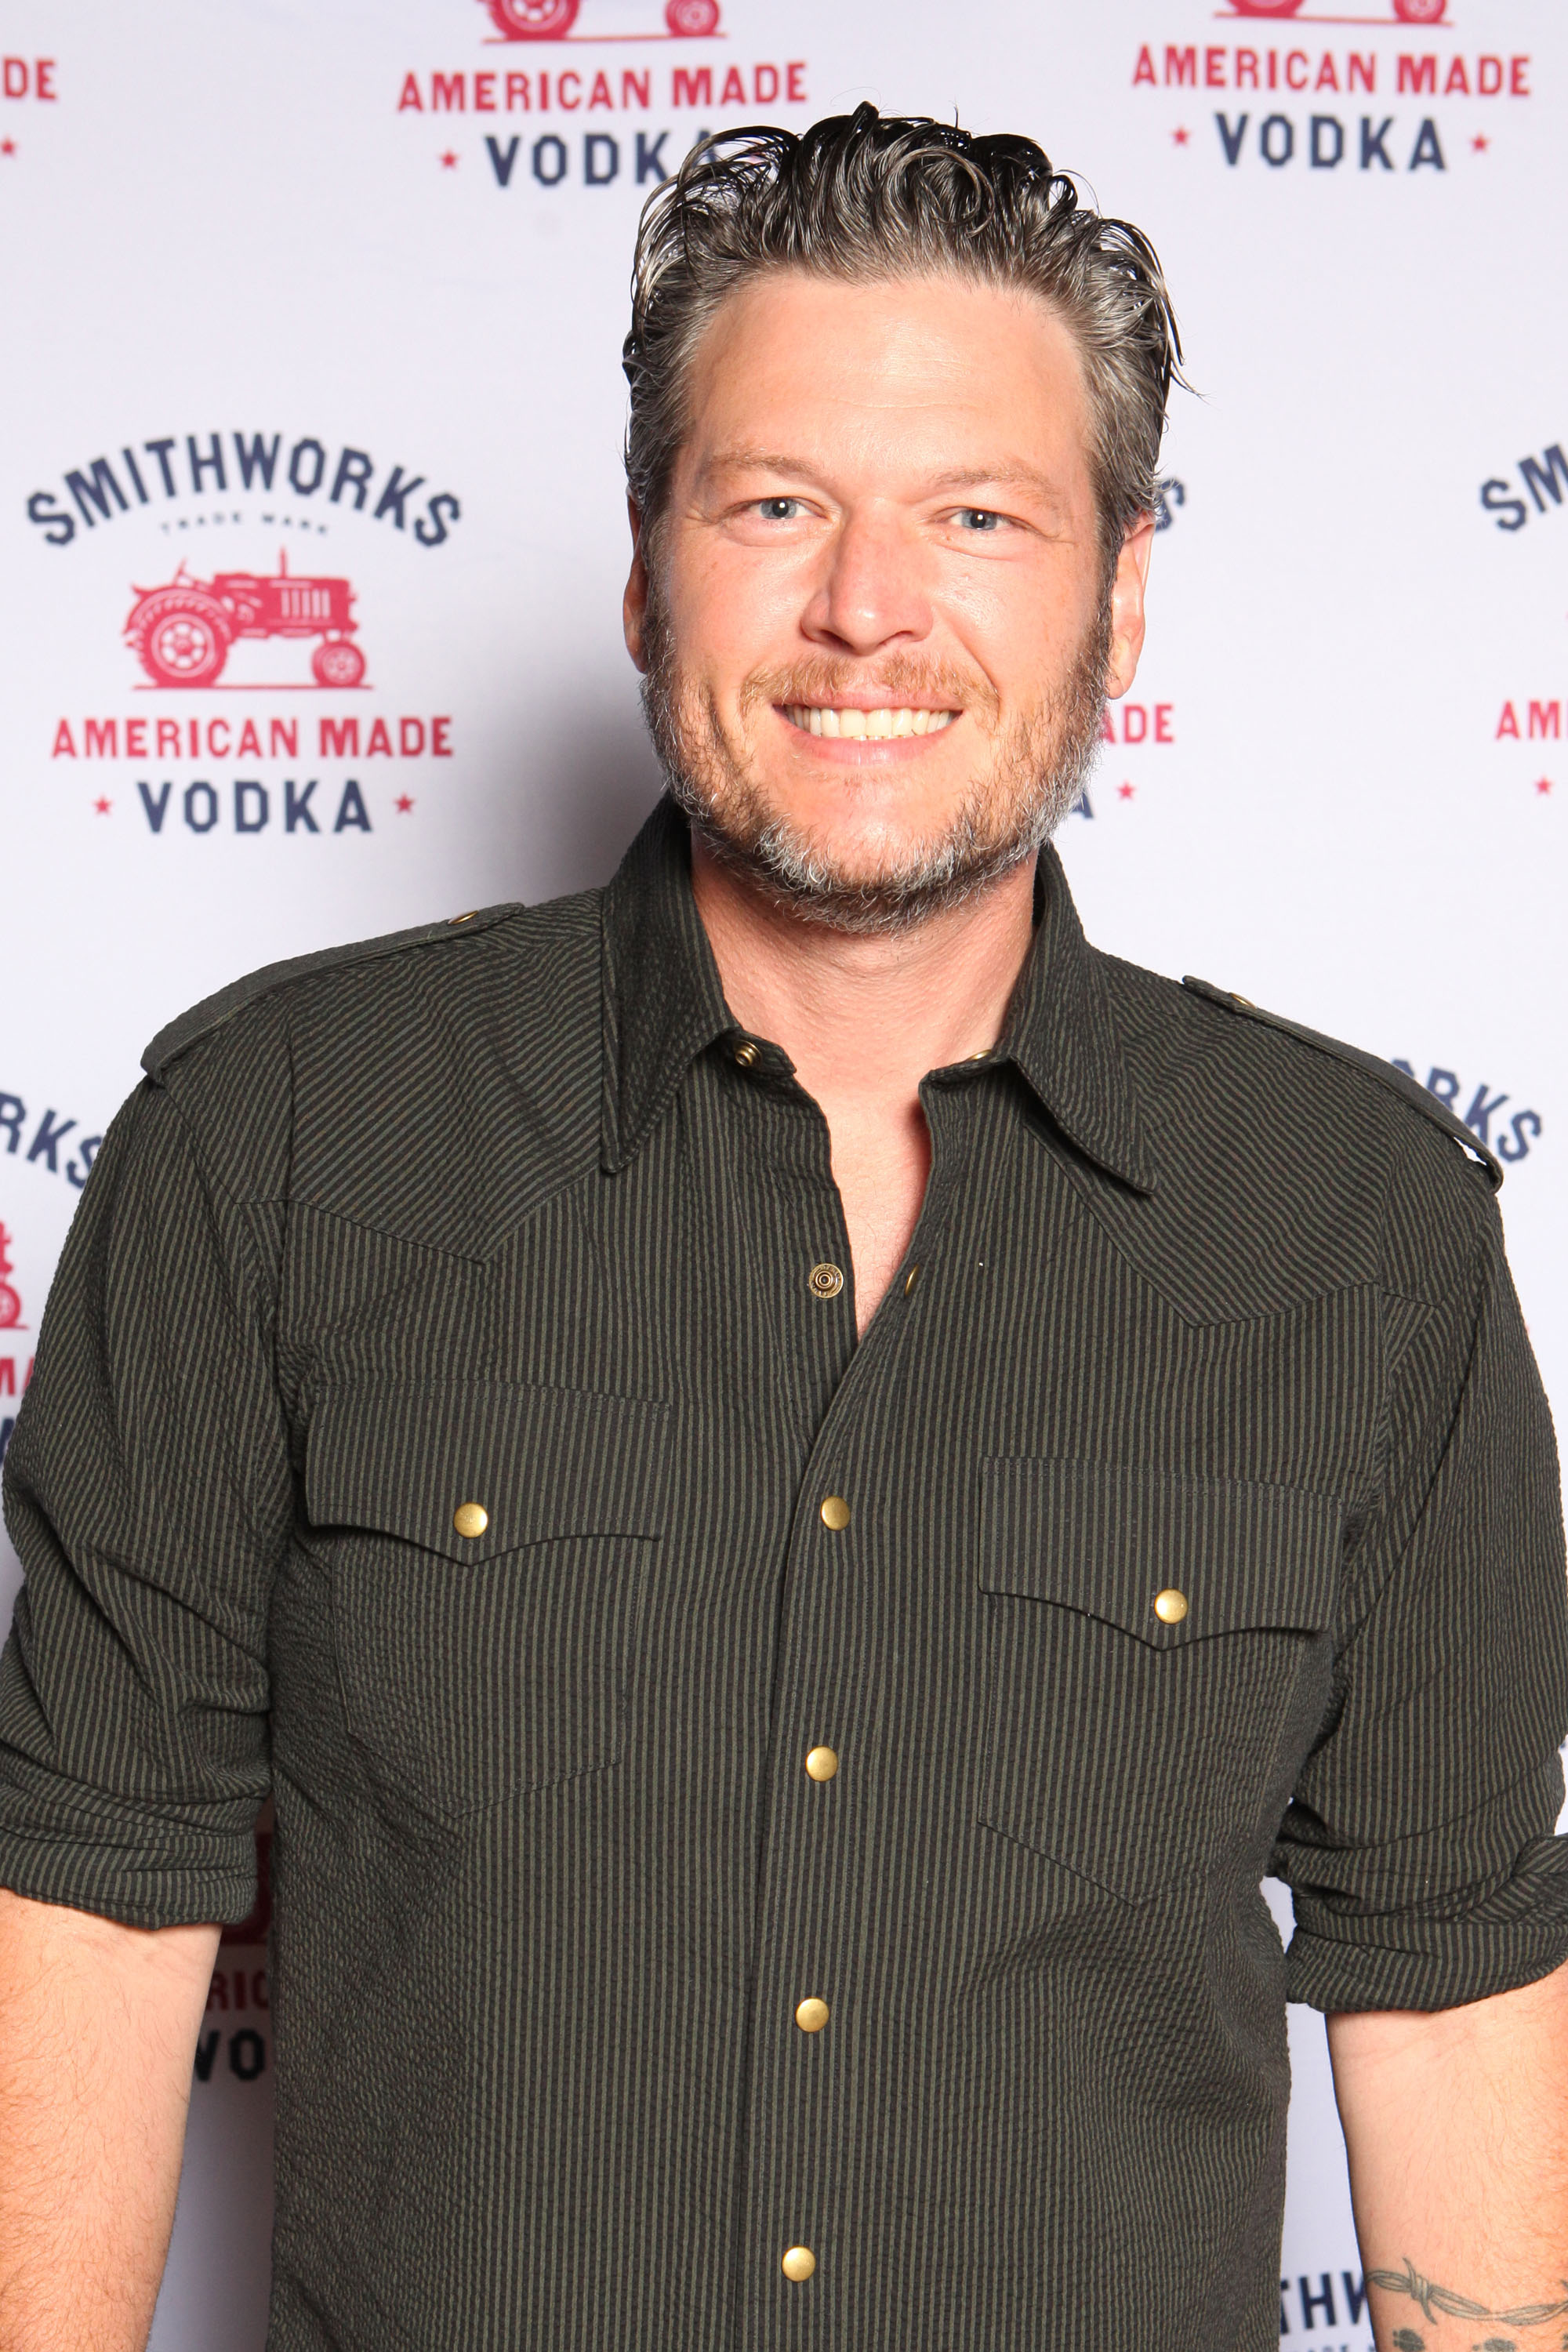 Read Blake Shelton Issues Apology After Old Tweets Surface